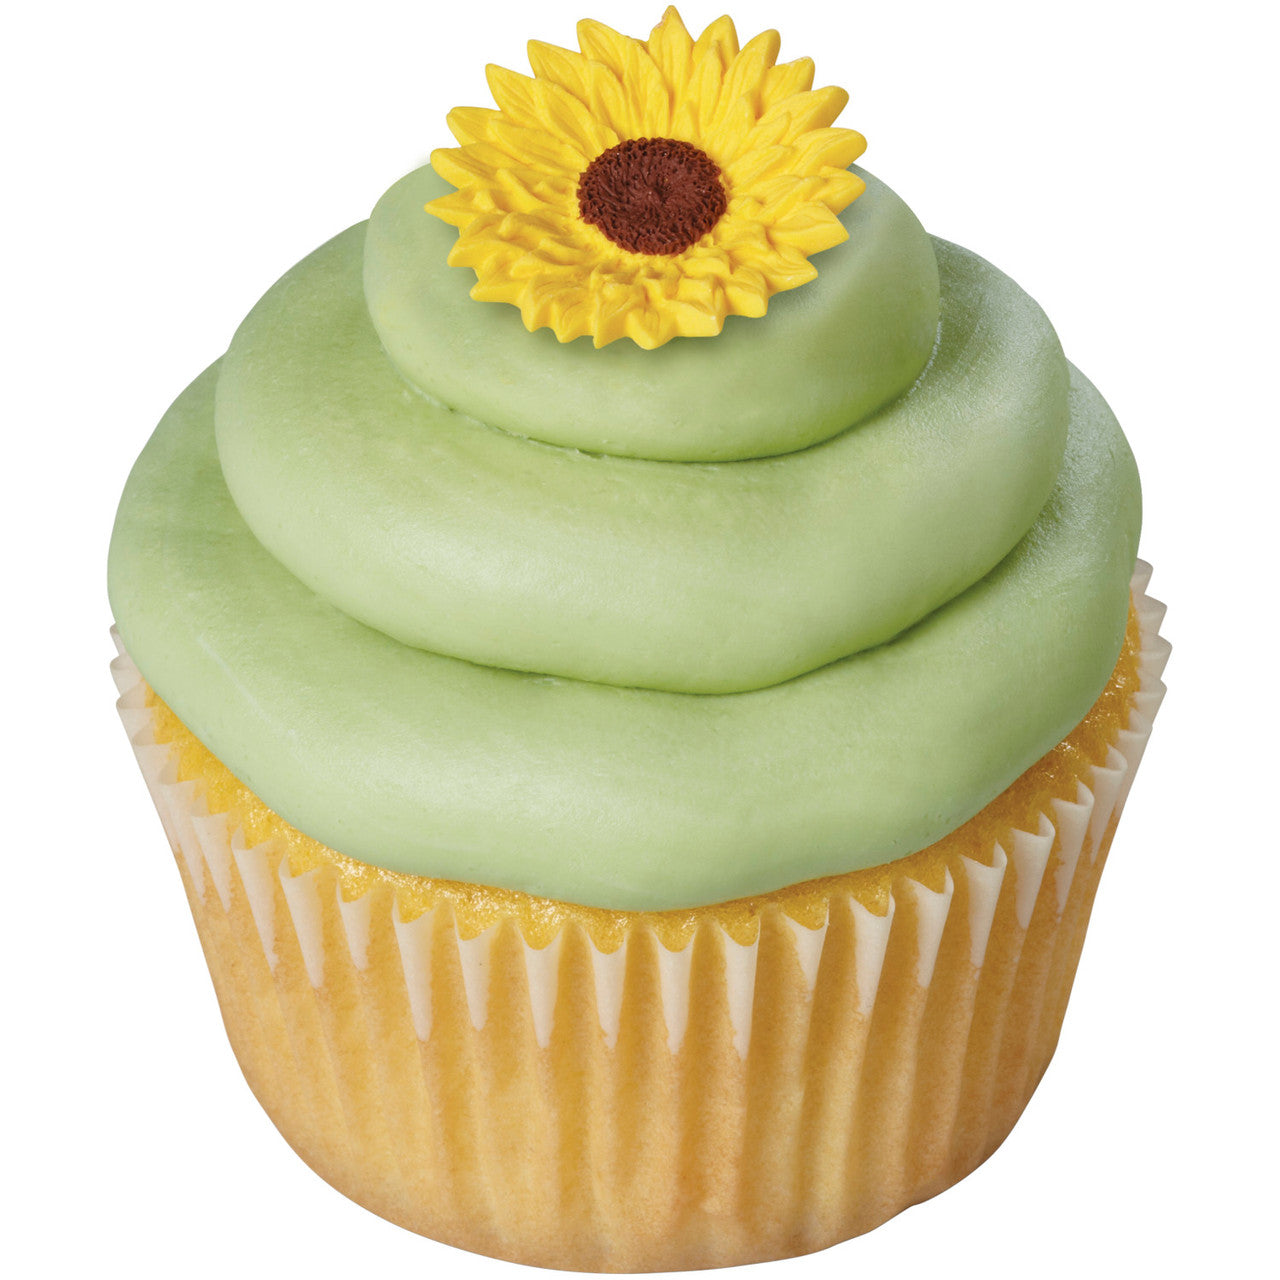 Sunflower Icing Decorations, 12 Pack